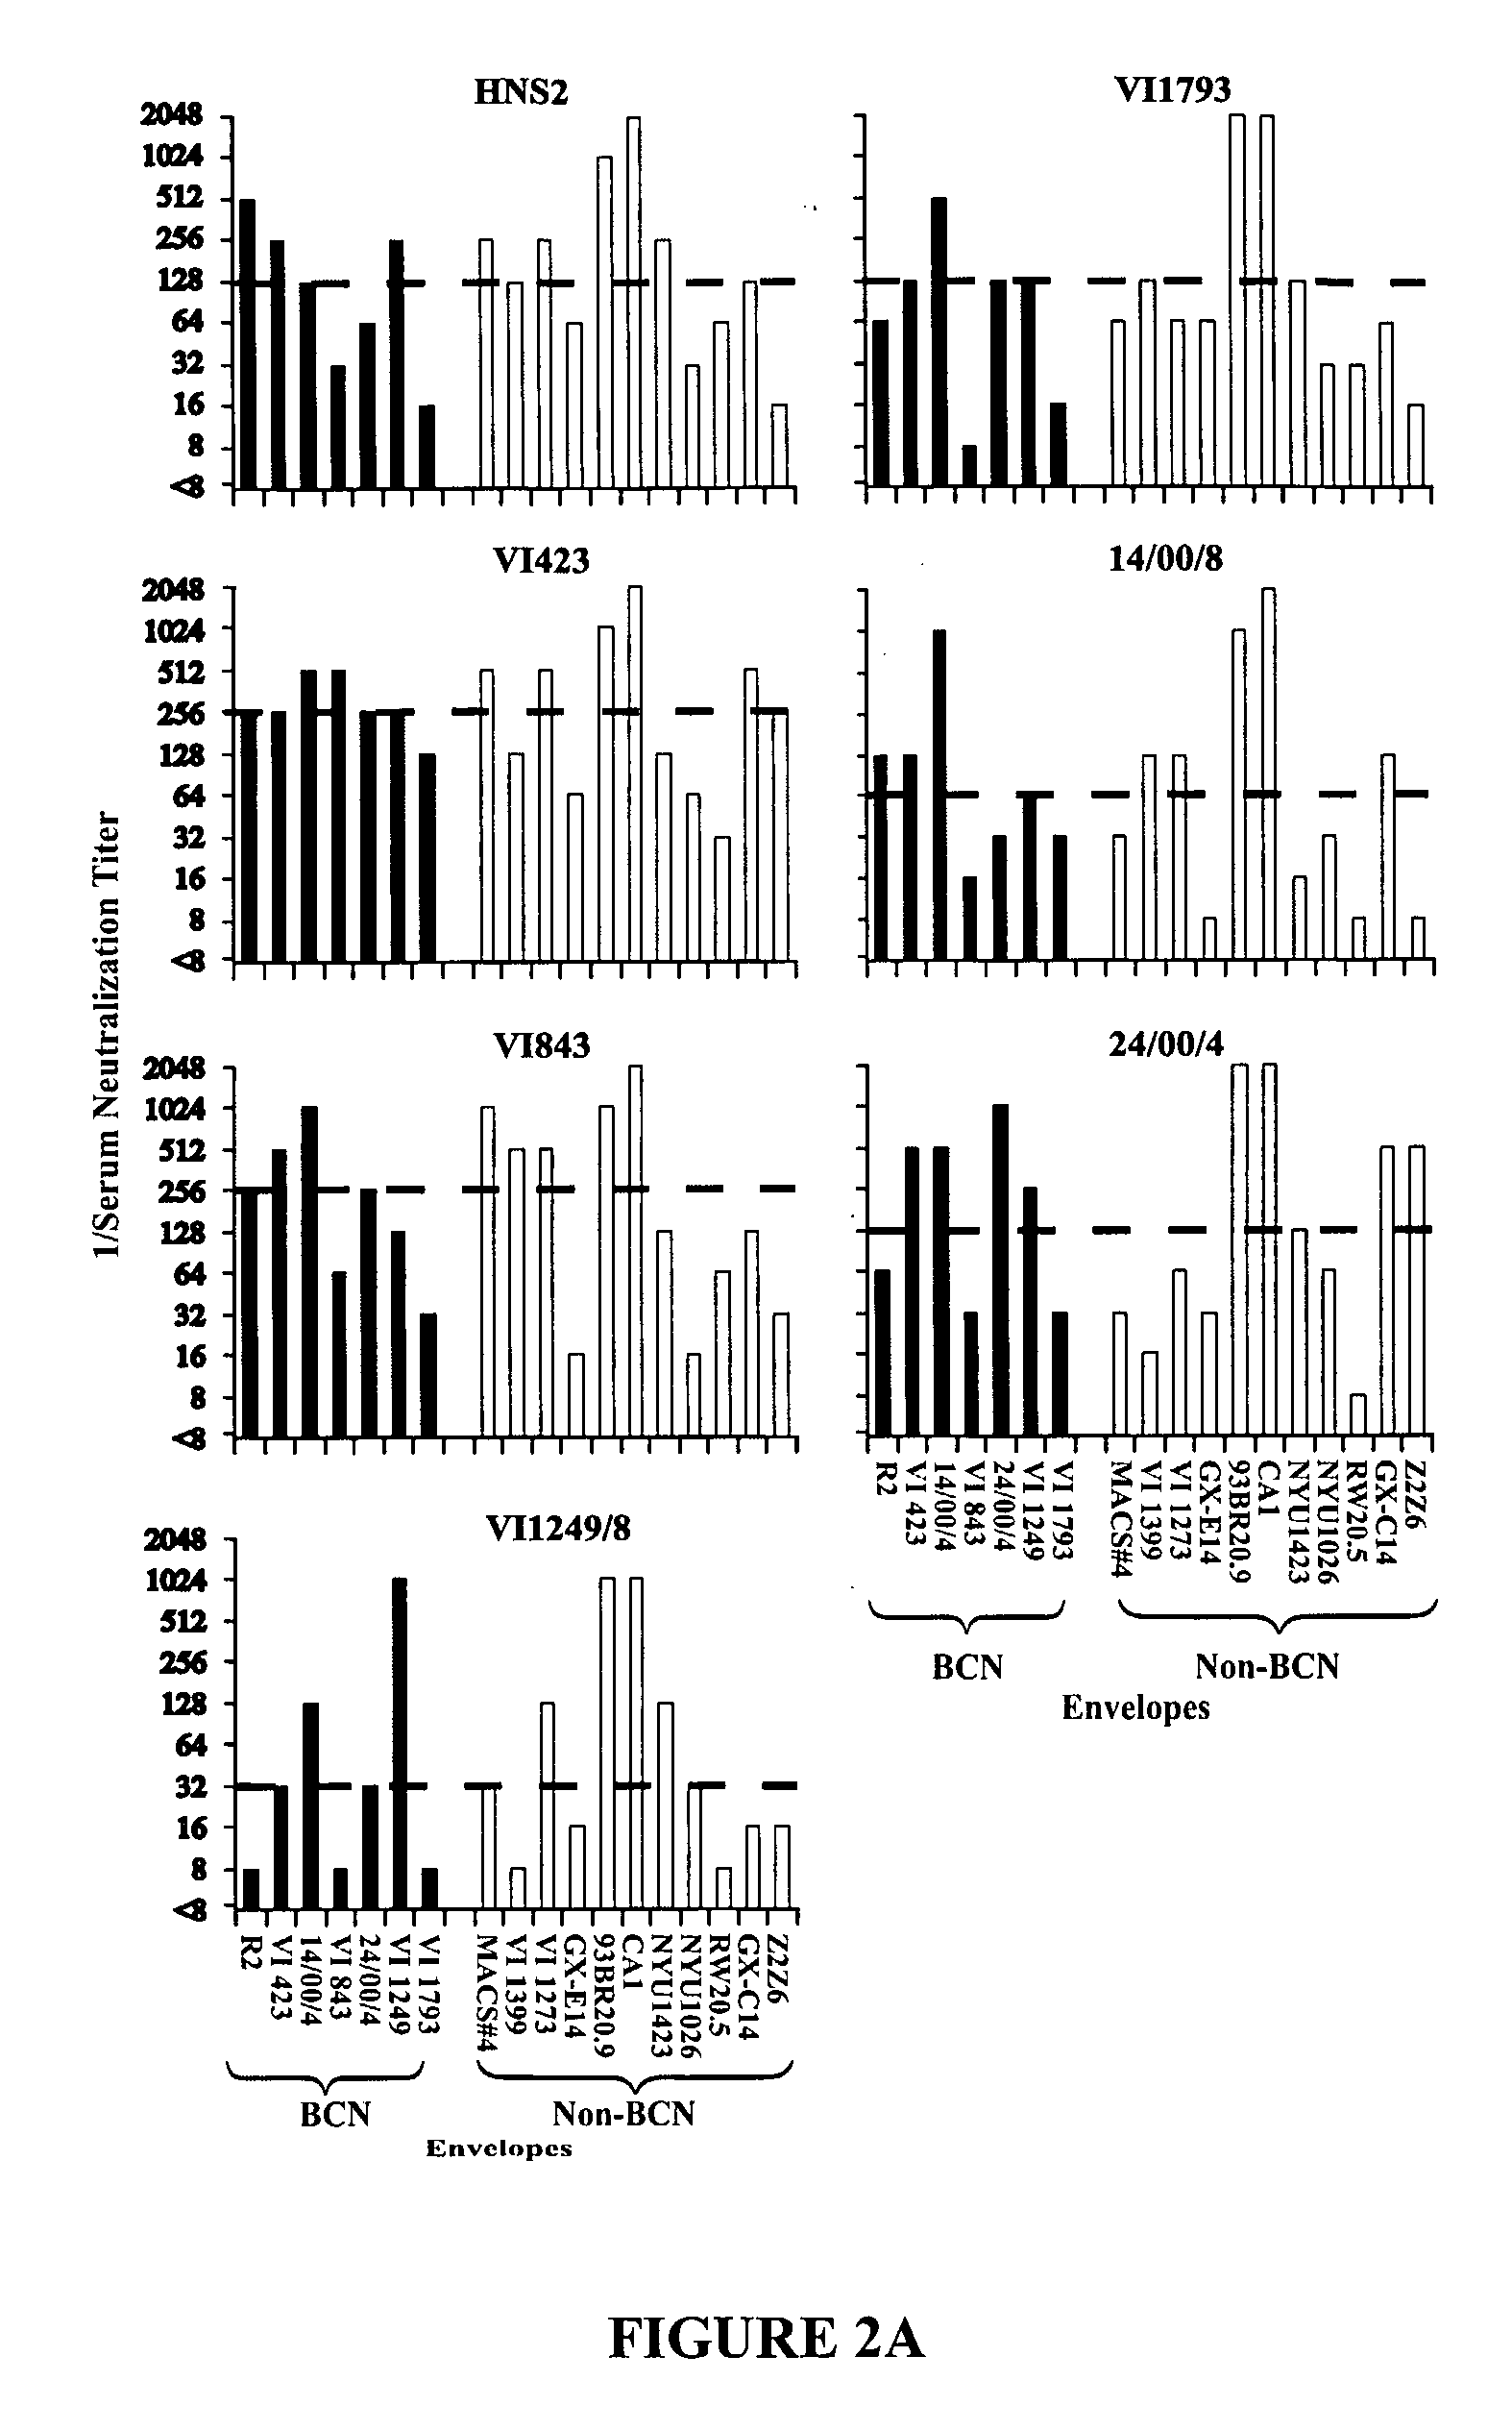 Modified HIV-1 Envelope Proteins